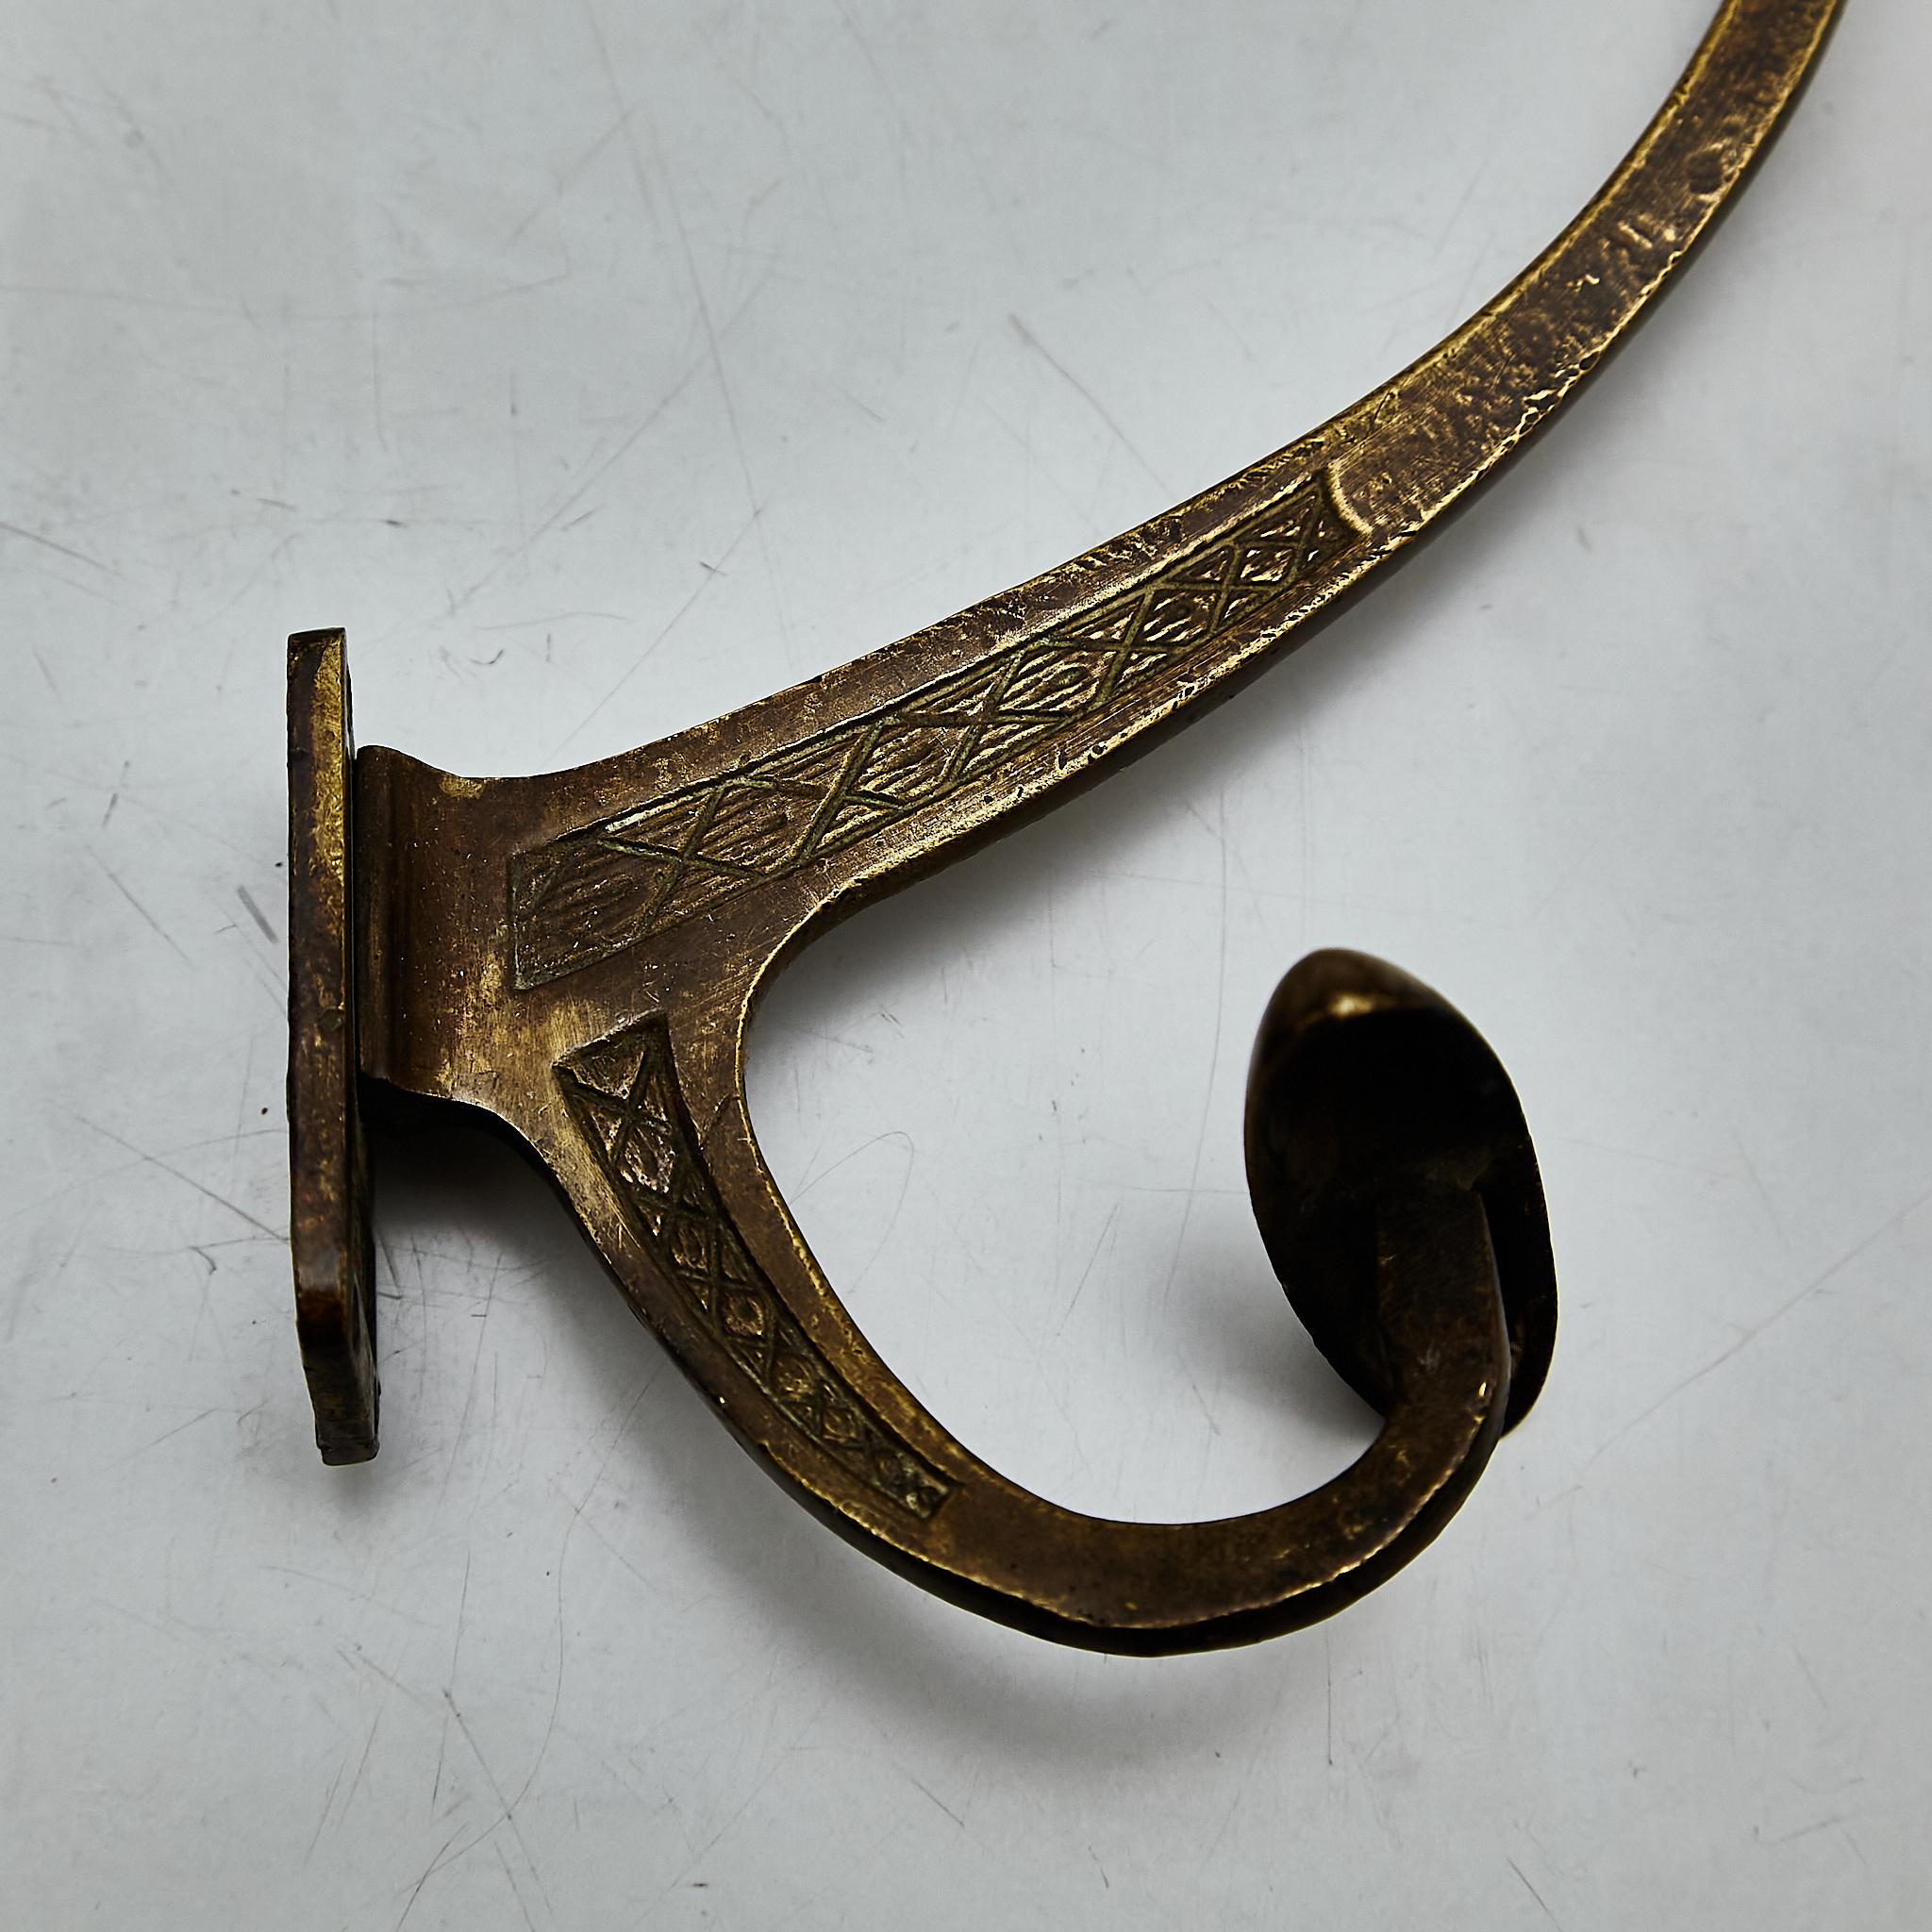 Elevate your wardrobe and decor with this exquisite pair of modernist metal coat hangers, hailing from the 1940s. These timeless pieces have aged gracefully, showcasing a beautiful patina that adds character and charm to their modernist